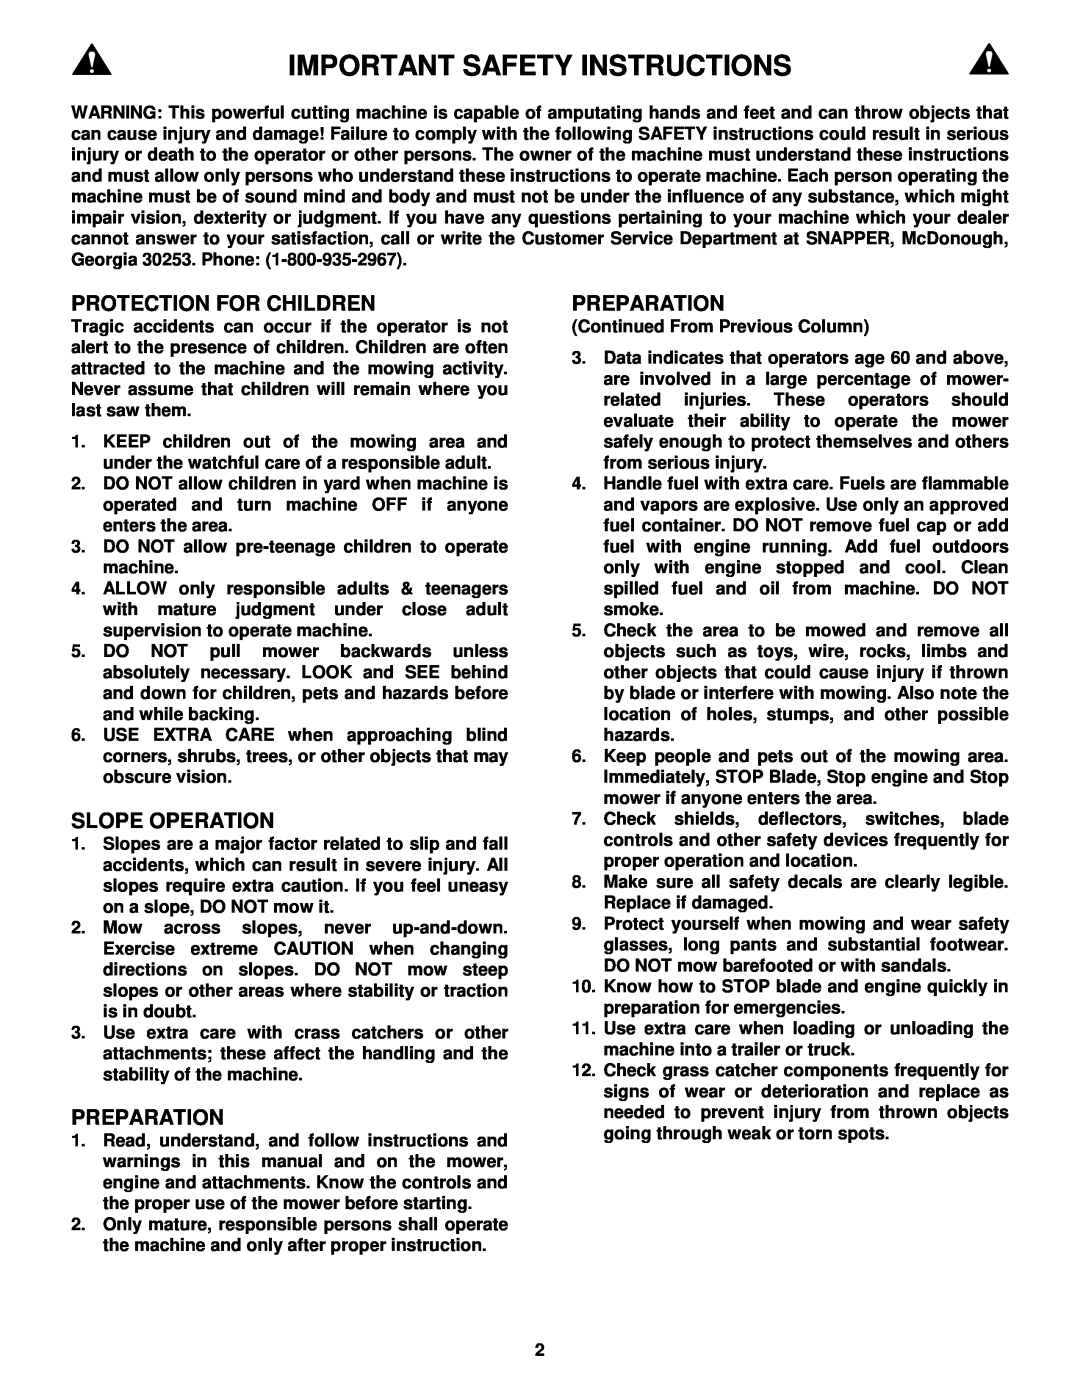 Snapper 215015 important safety instructions Important Safety Instructions 